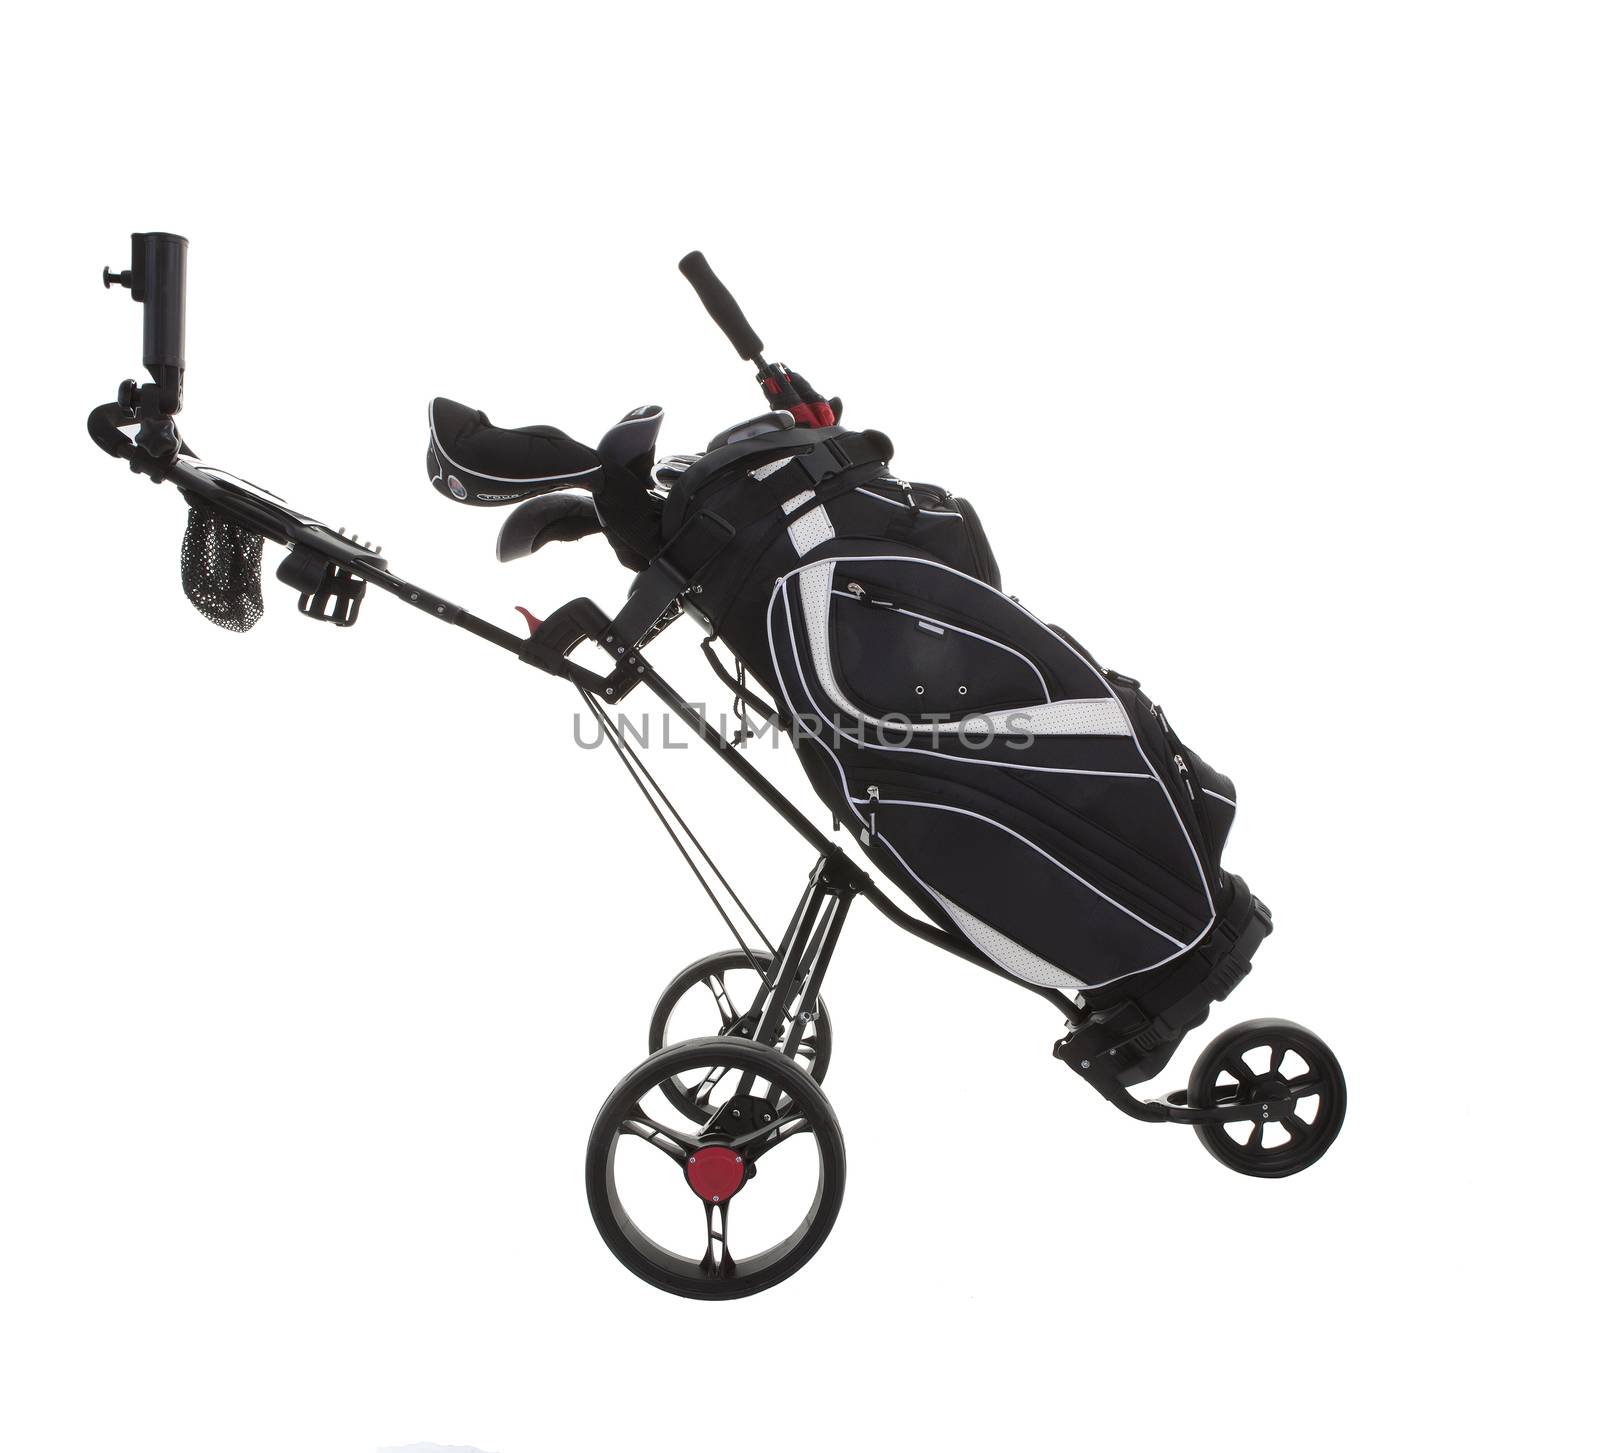 SWINDON, UK -FEBRUARY 18, 2015: Golf Trolley with Cart Bag On A White Background